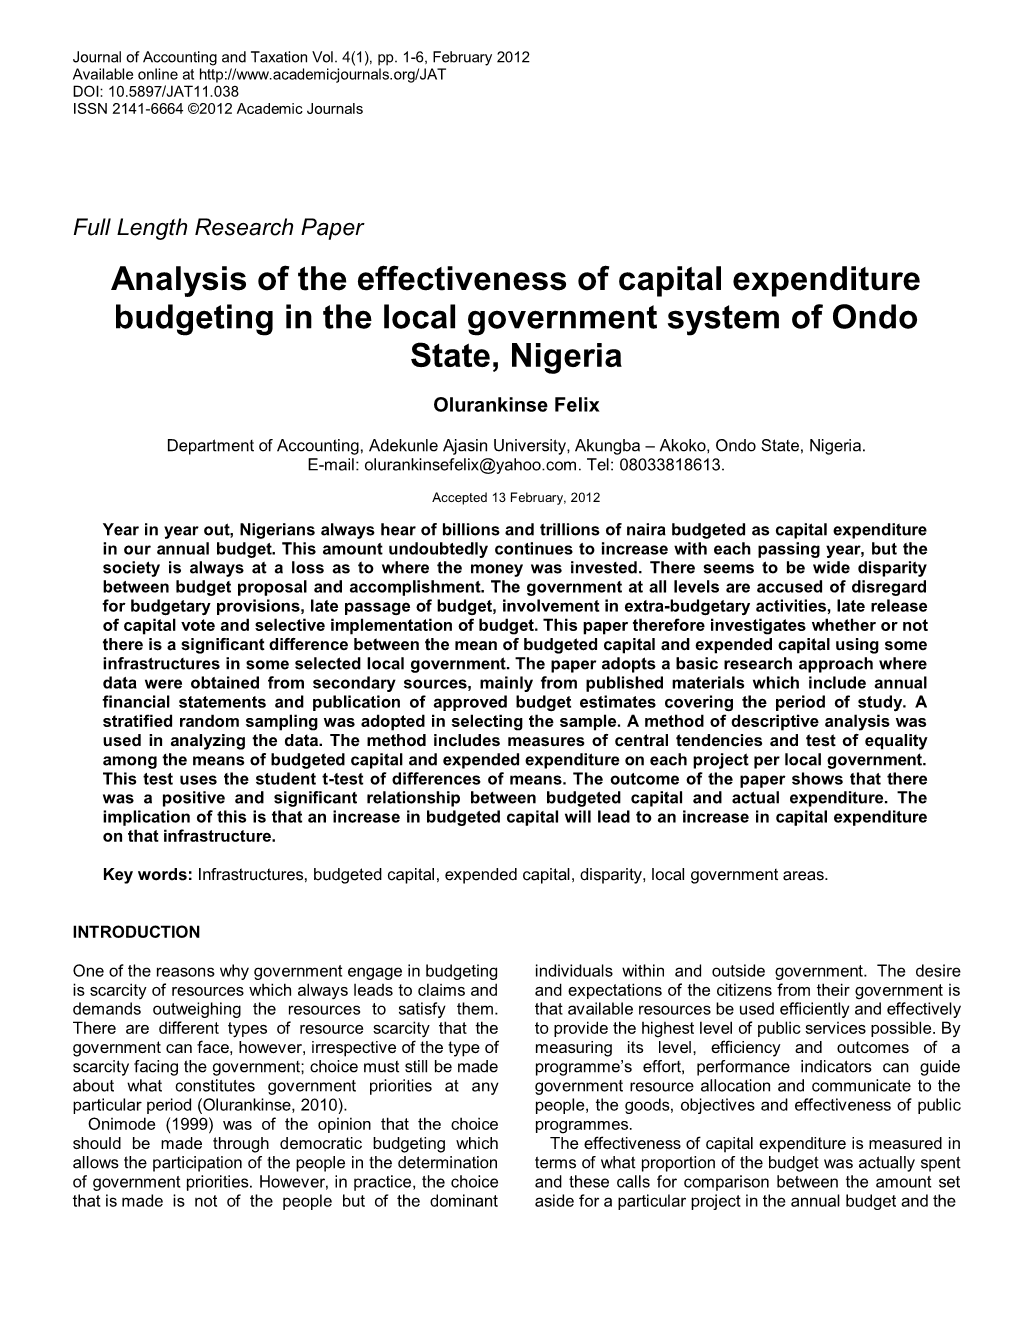 Analysis of the Effectiveness of Capital Expenditure Budgeting in the Local Government System of Ondo State, Nigeria